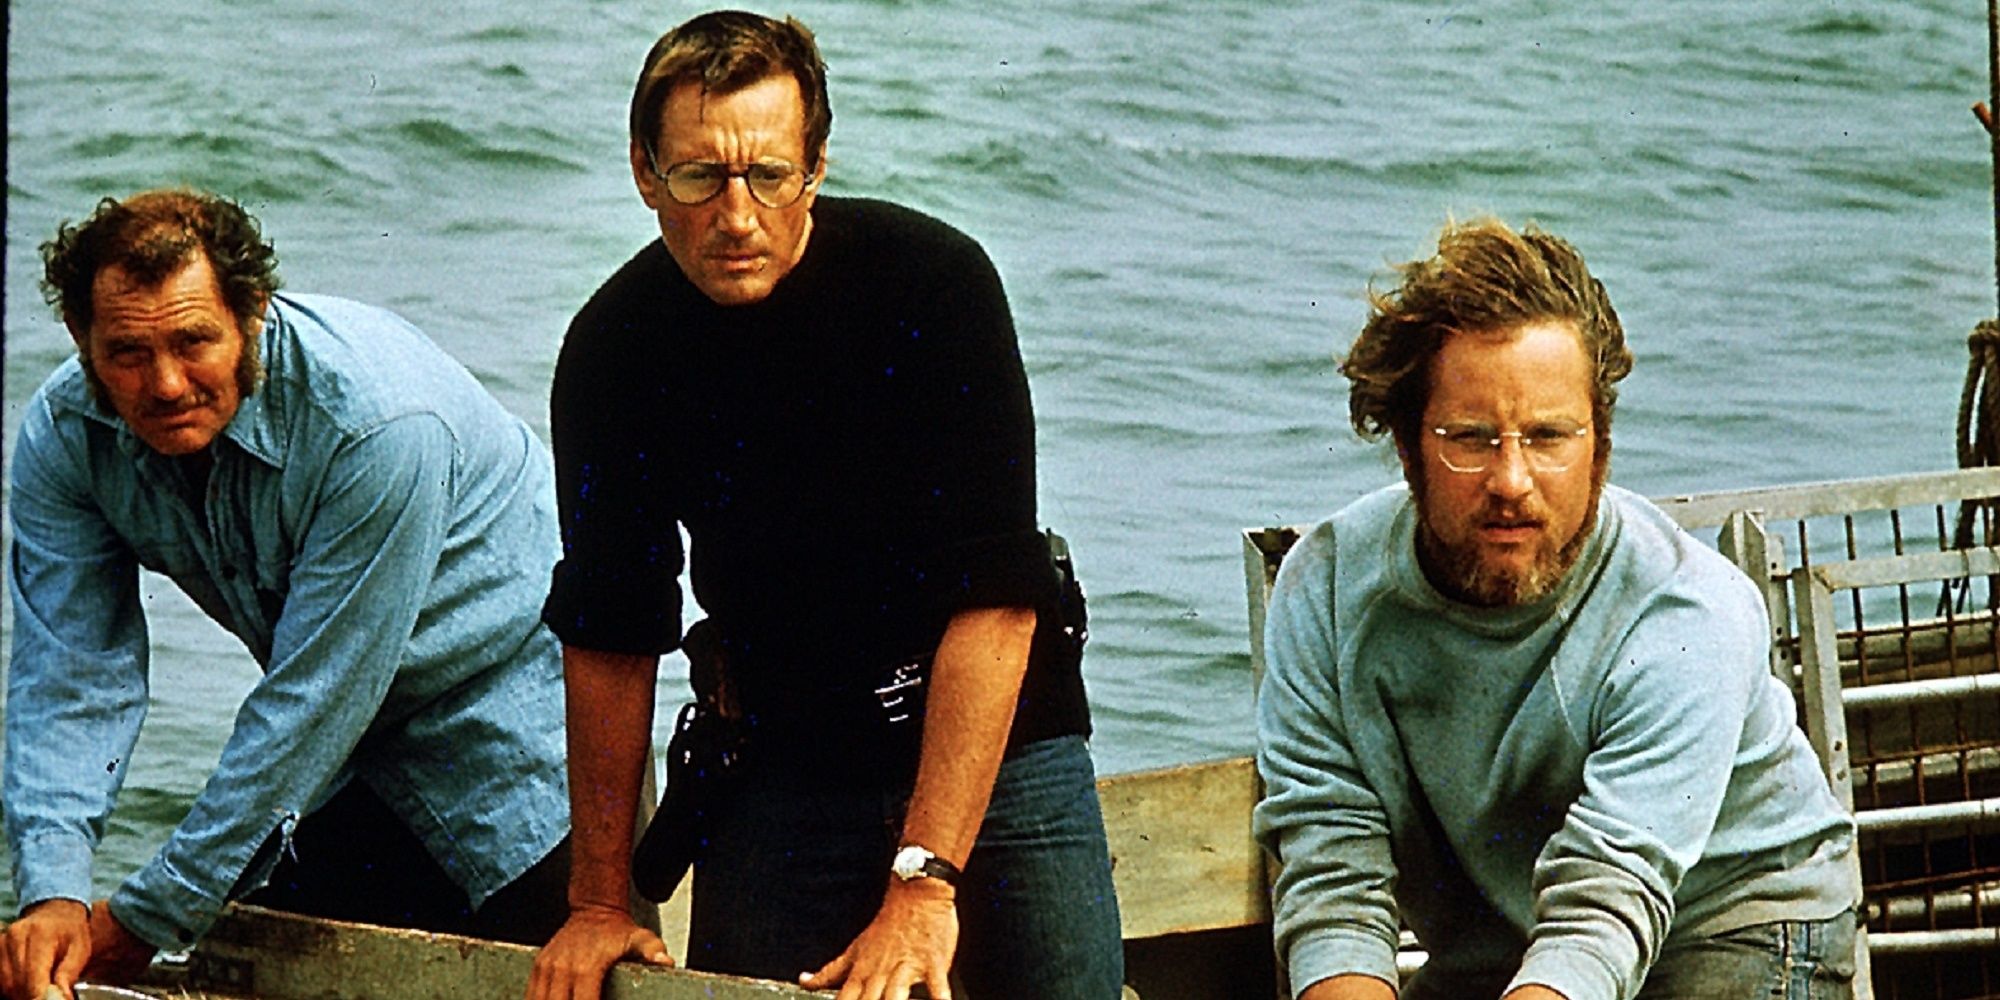 Jaws - Three men on a boat looking at the ocean water